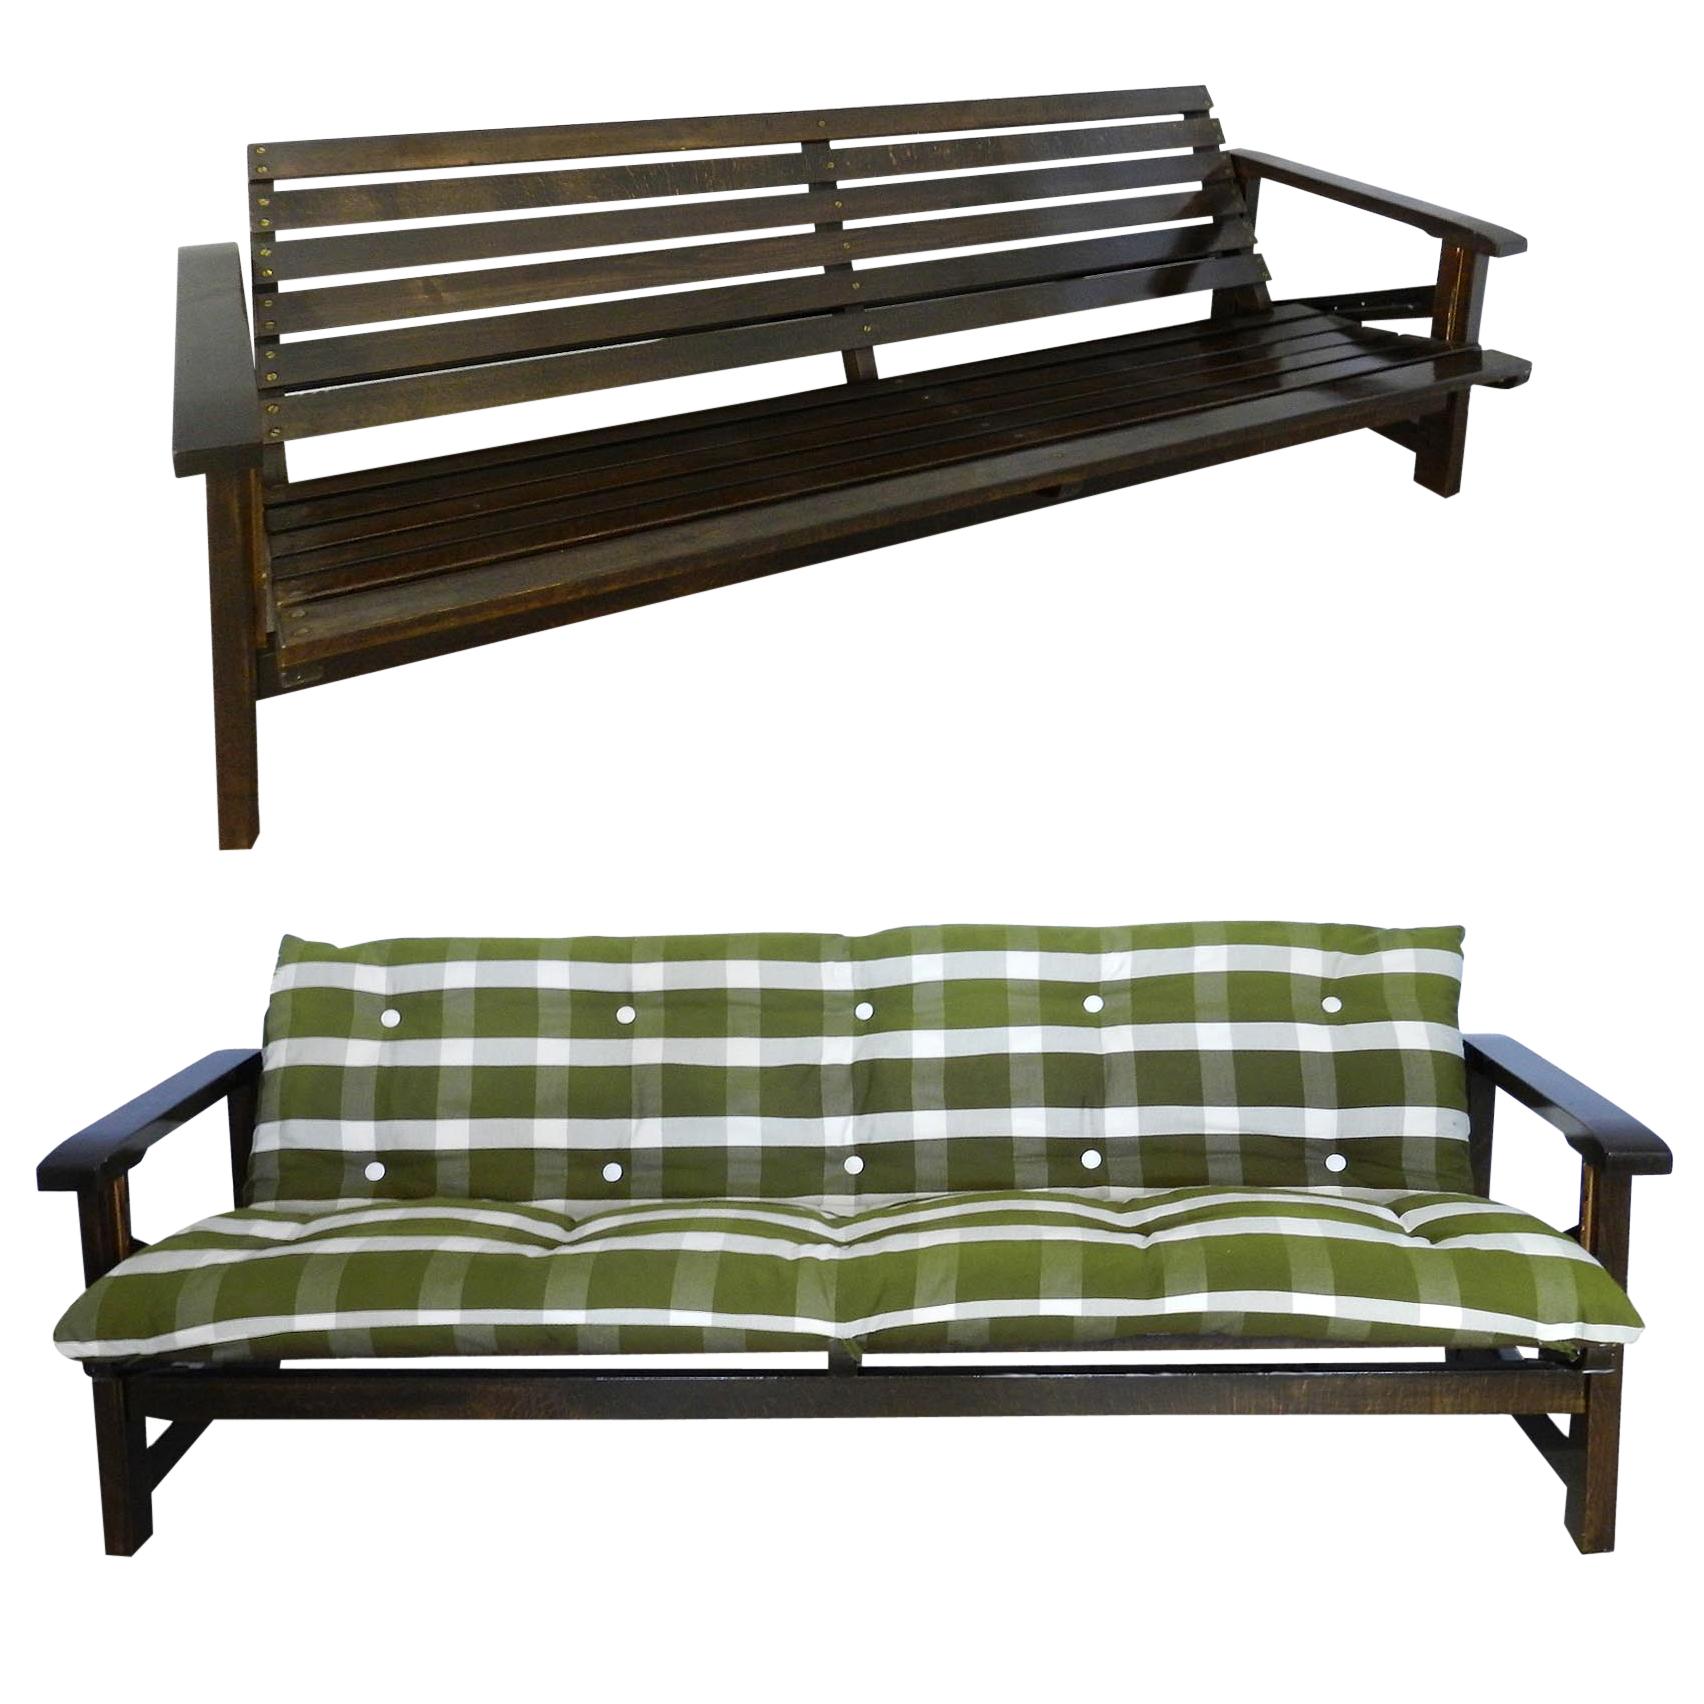 Midcentury French Adjustable Patio or Garden Lounger Sofa Bench by Clairitex